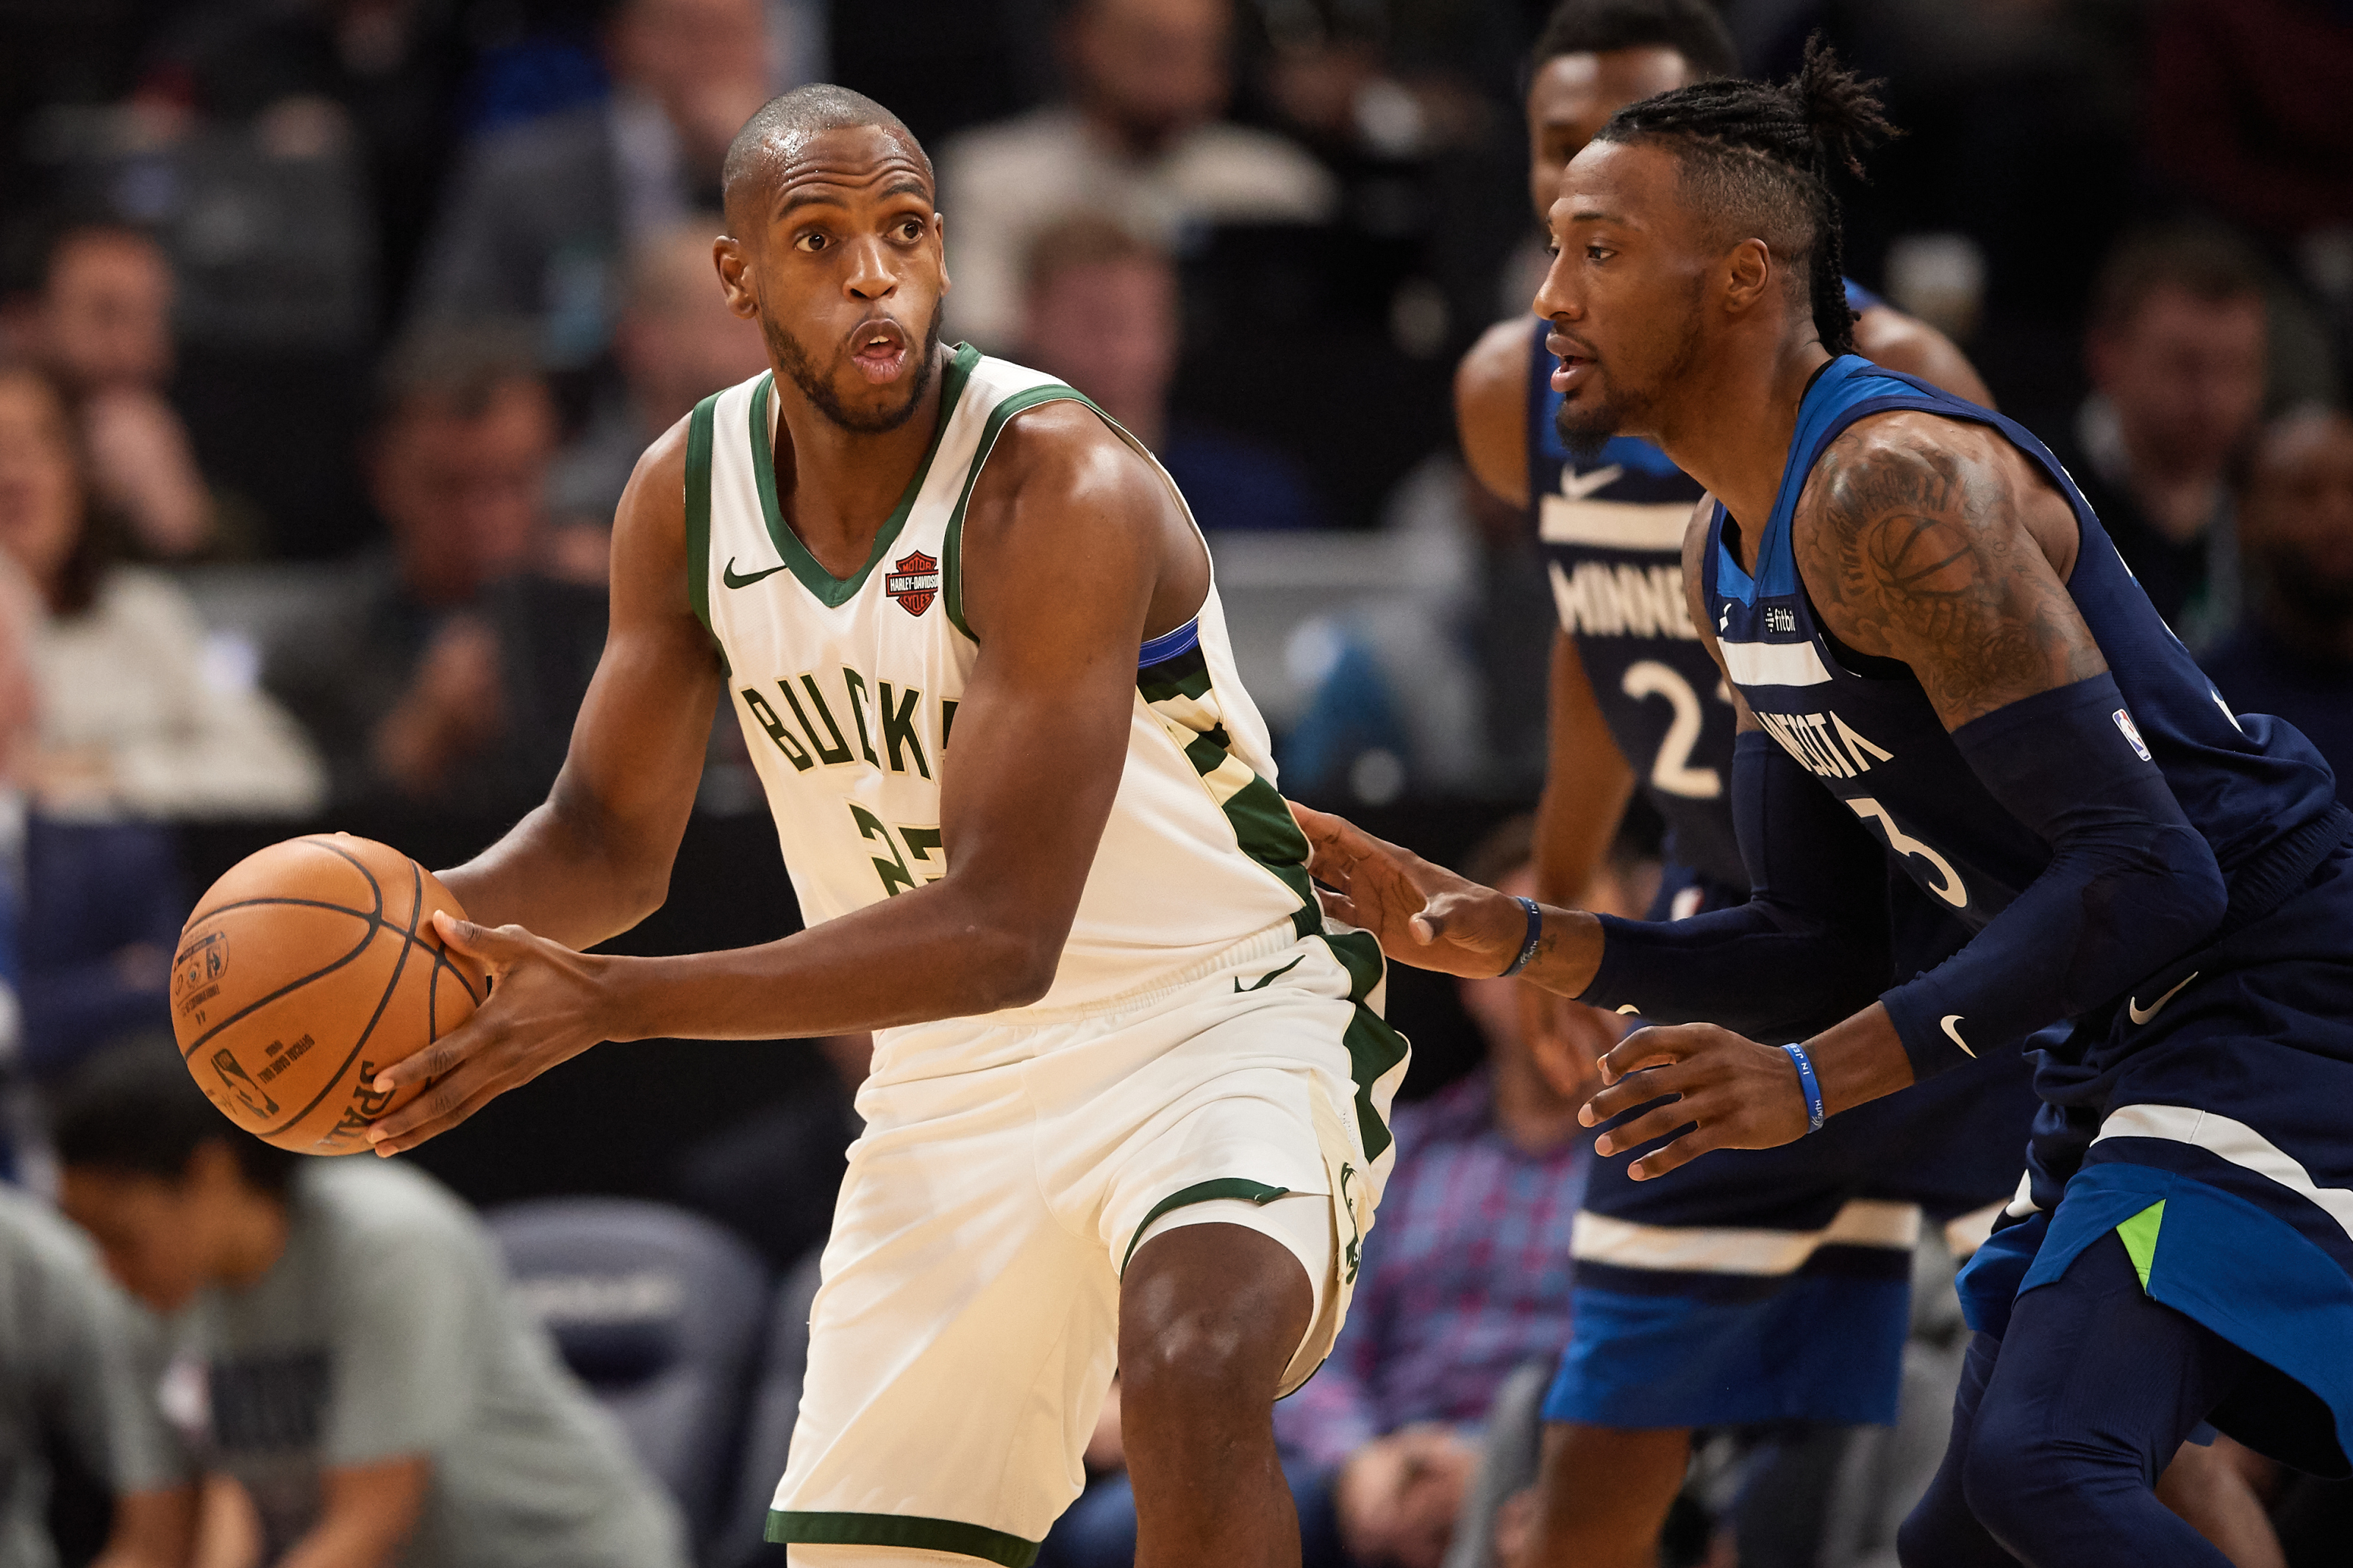 Khris Middleton has been worth every penny for the Bucks